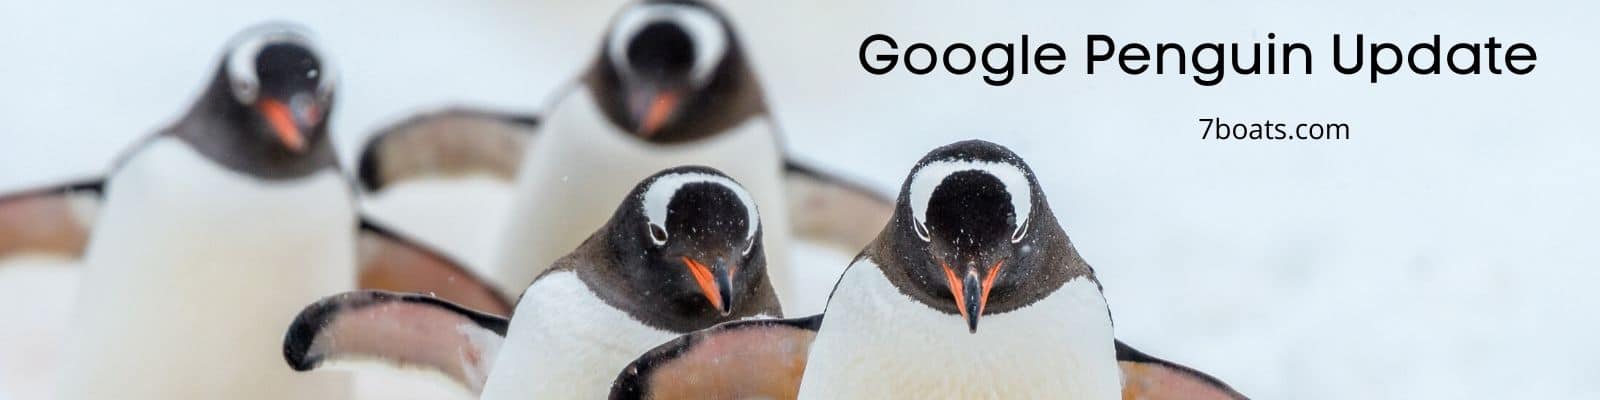 How to Stay Safe from Google Penguin Update